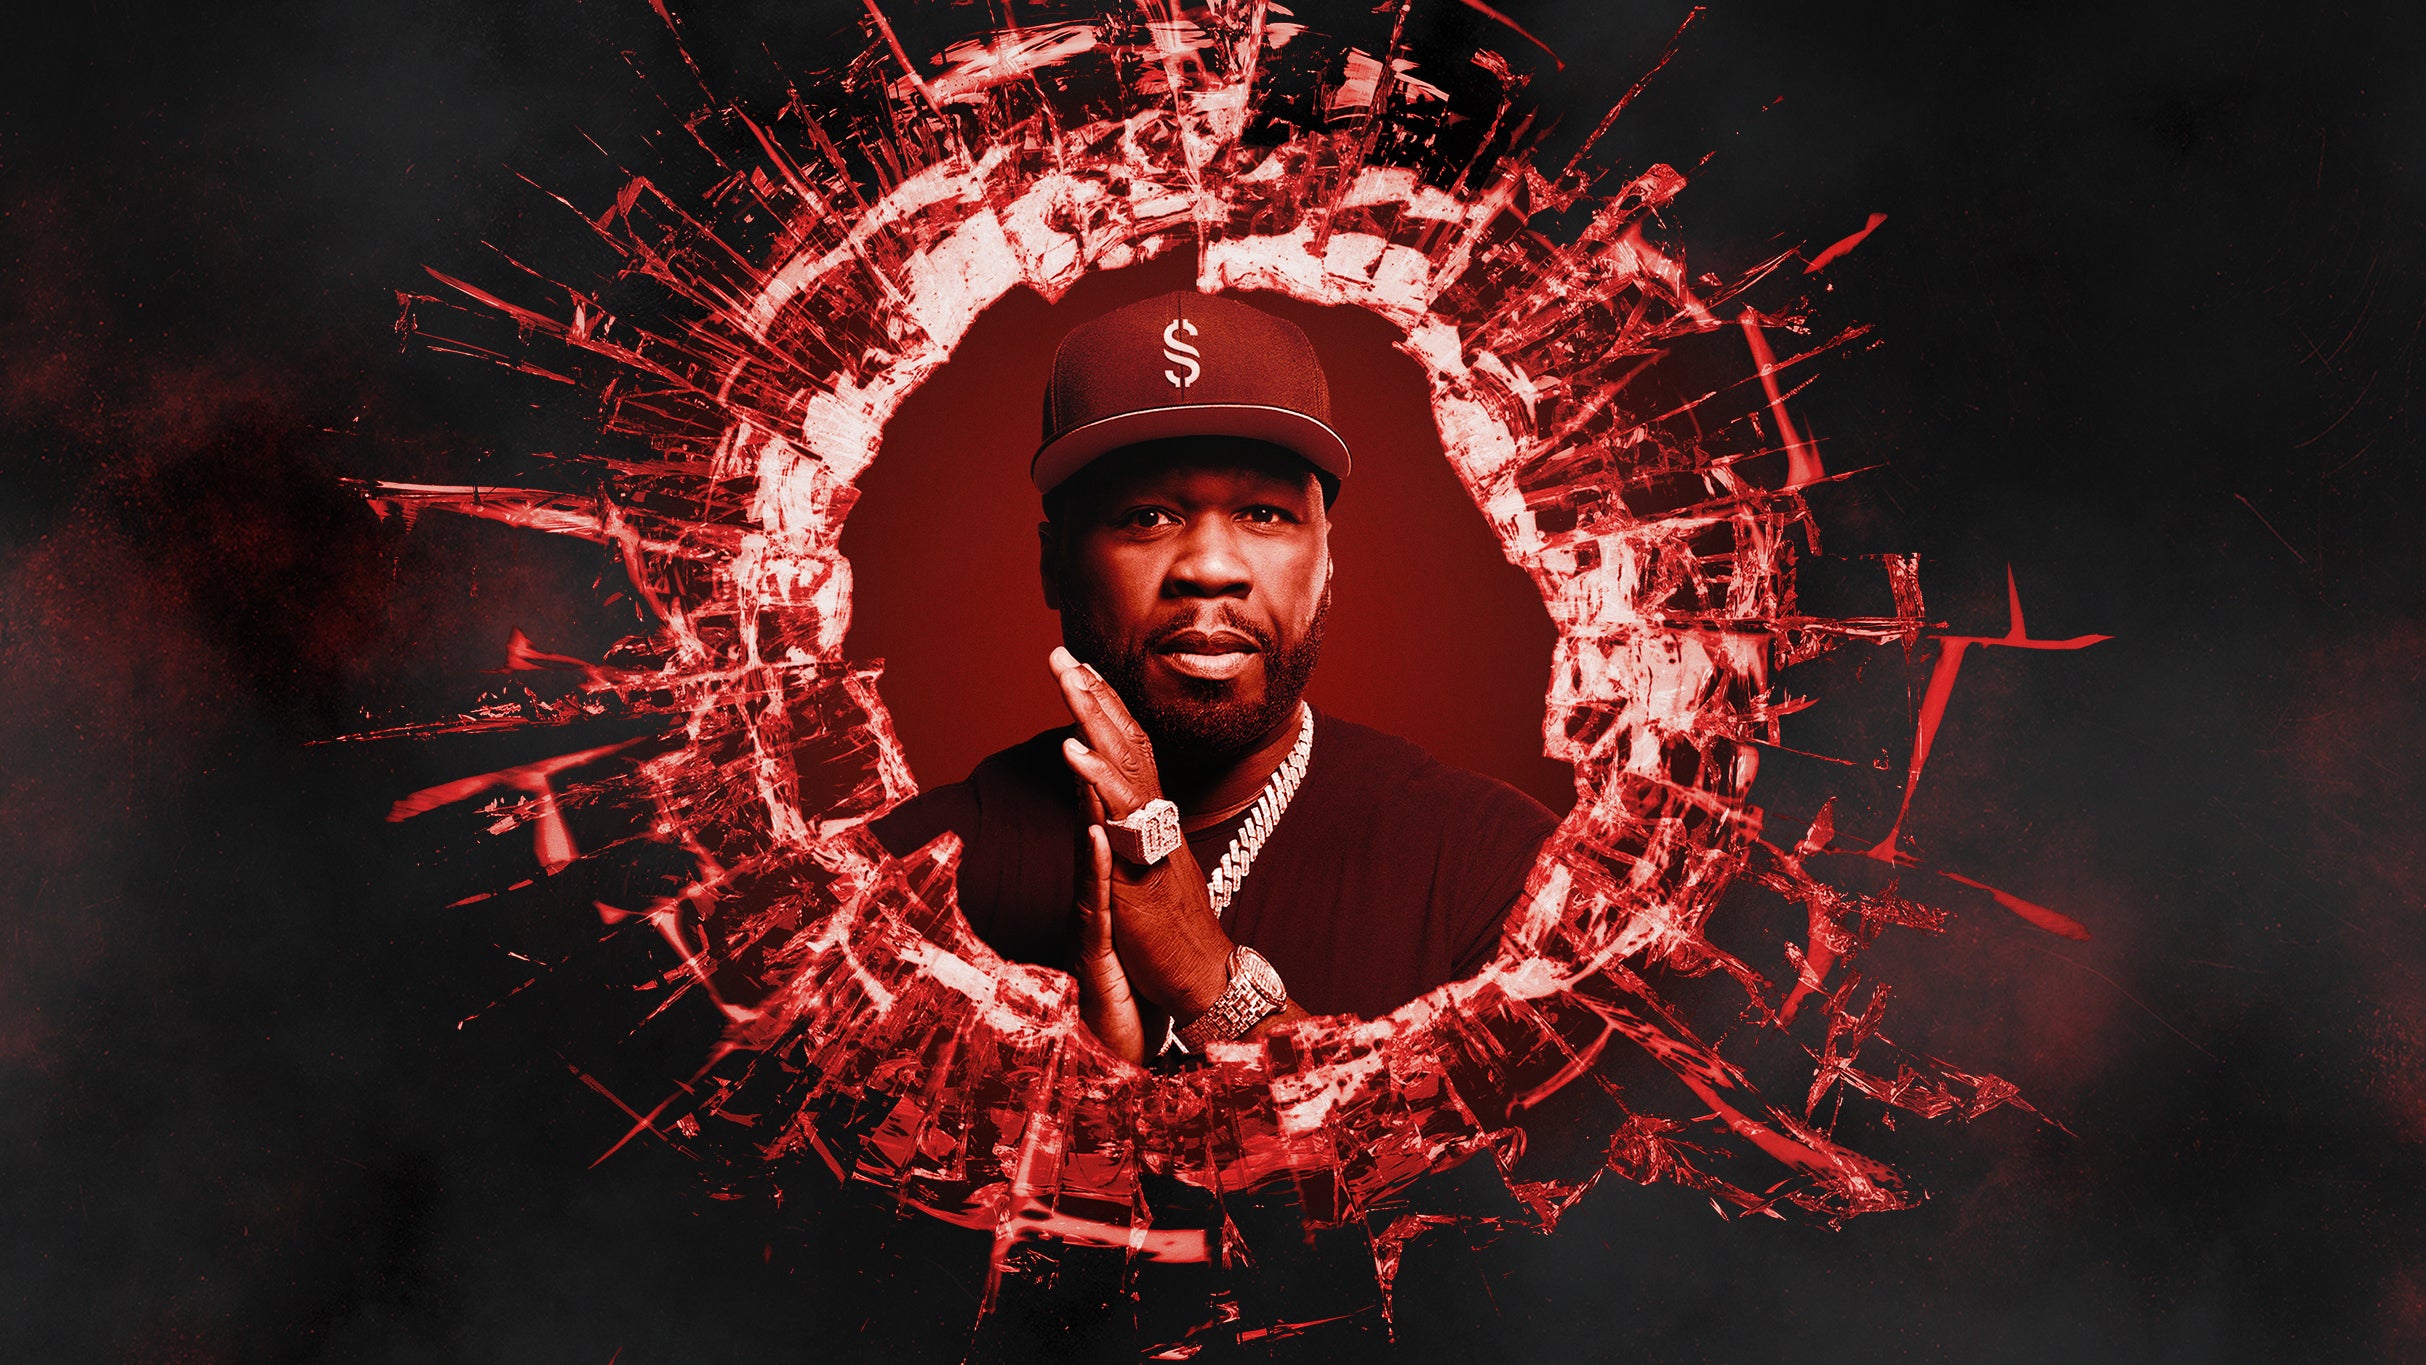 50 Cent: The Final Lap Tour at XFINITY Theatre